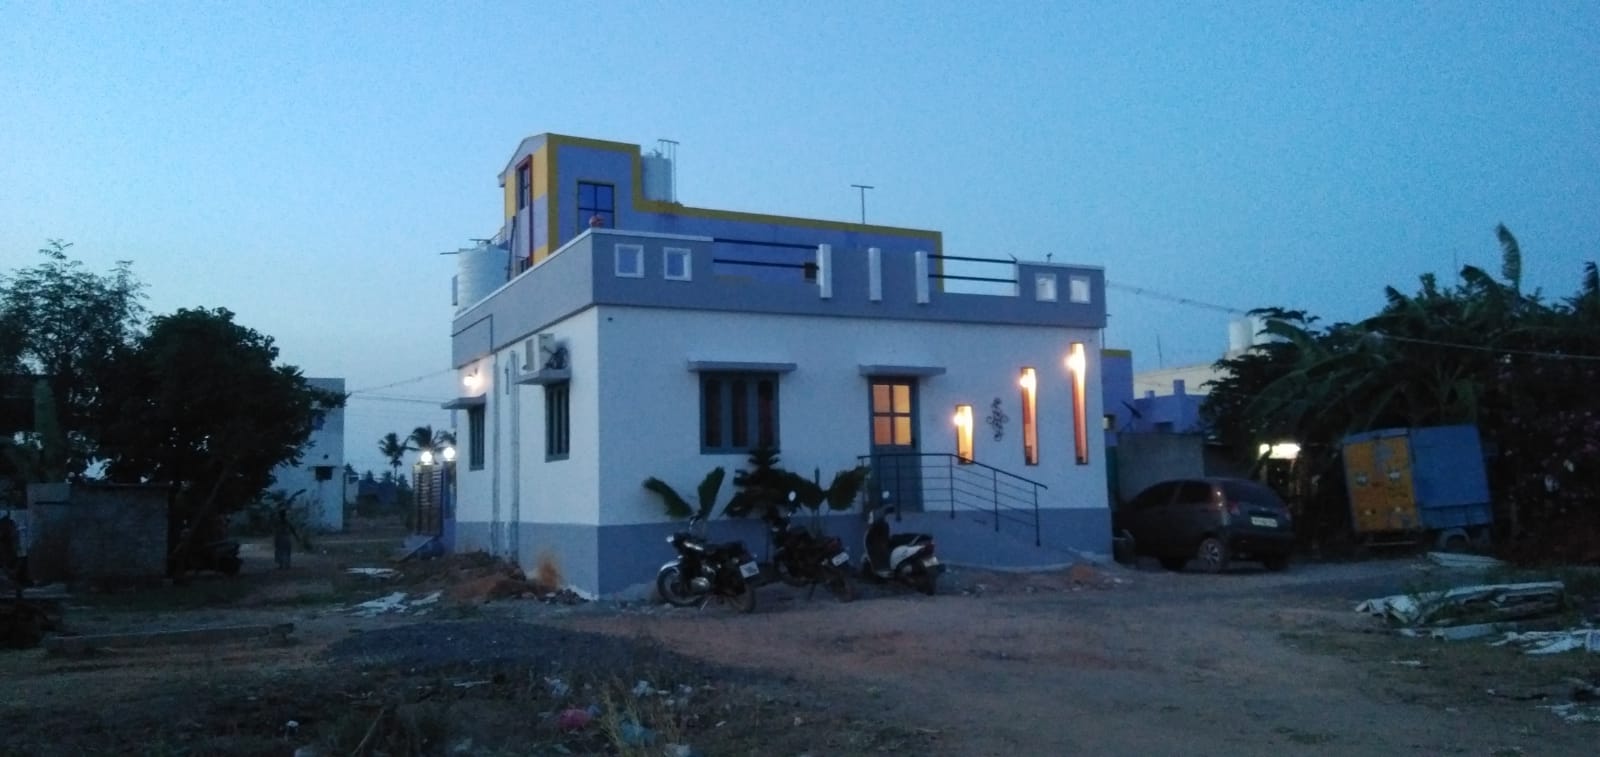 10185-for-rent-2BHK-Residential-Independent-House-Fully-Furnished-Monthly-rs-10000-in-Villianur-Villianur--Pondicherry